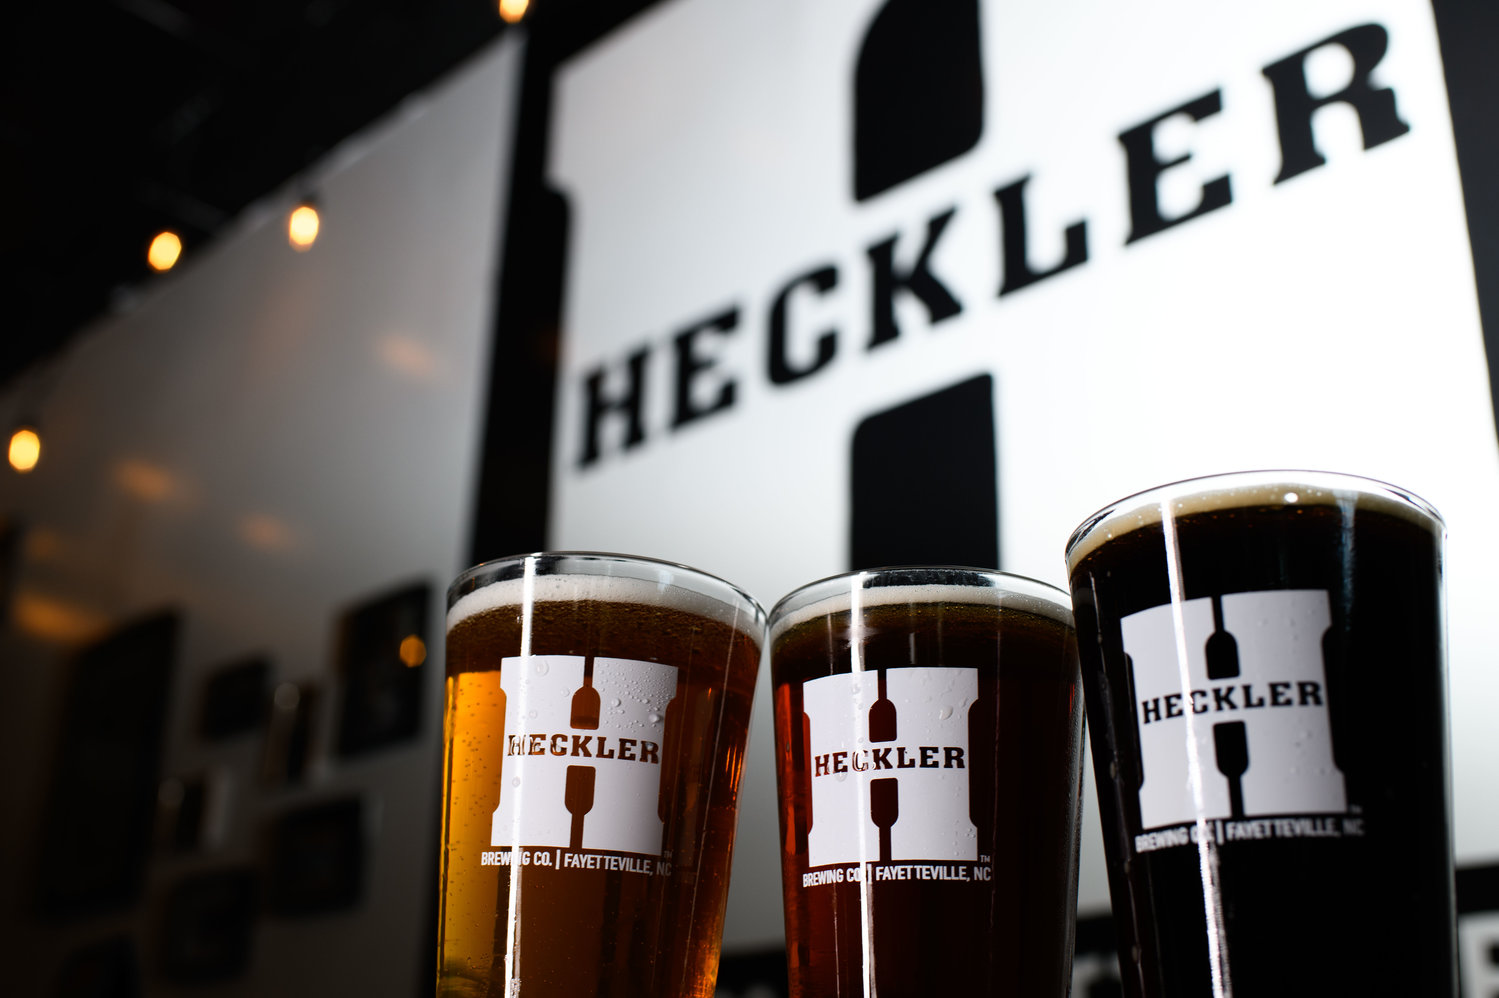 Heckler Brewing Co. prepares to celebrate Octoberfest with fall brews. Pictured is their Pale Heckler, Red Heckler, and Sláinte.